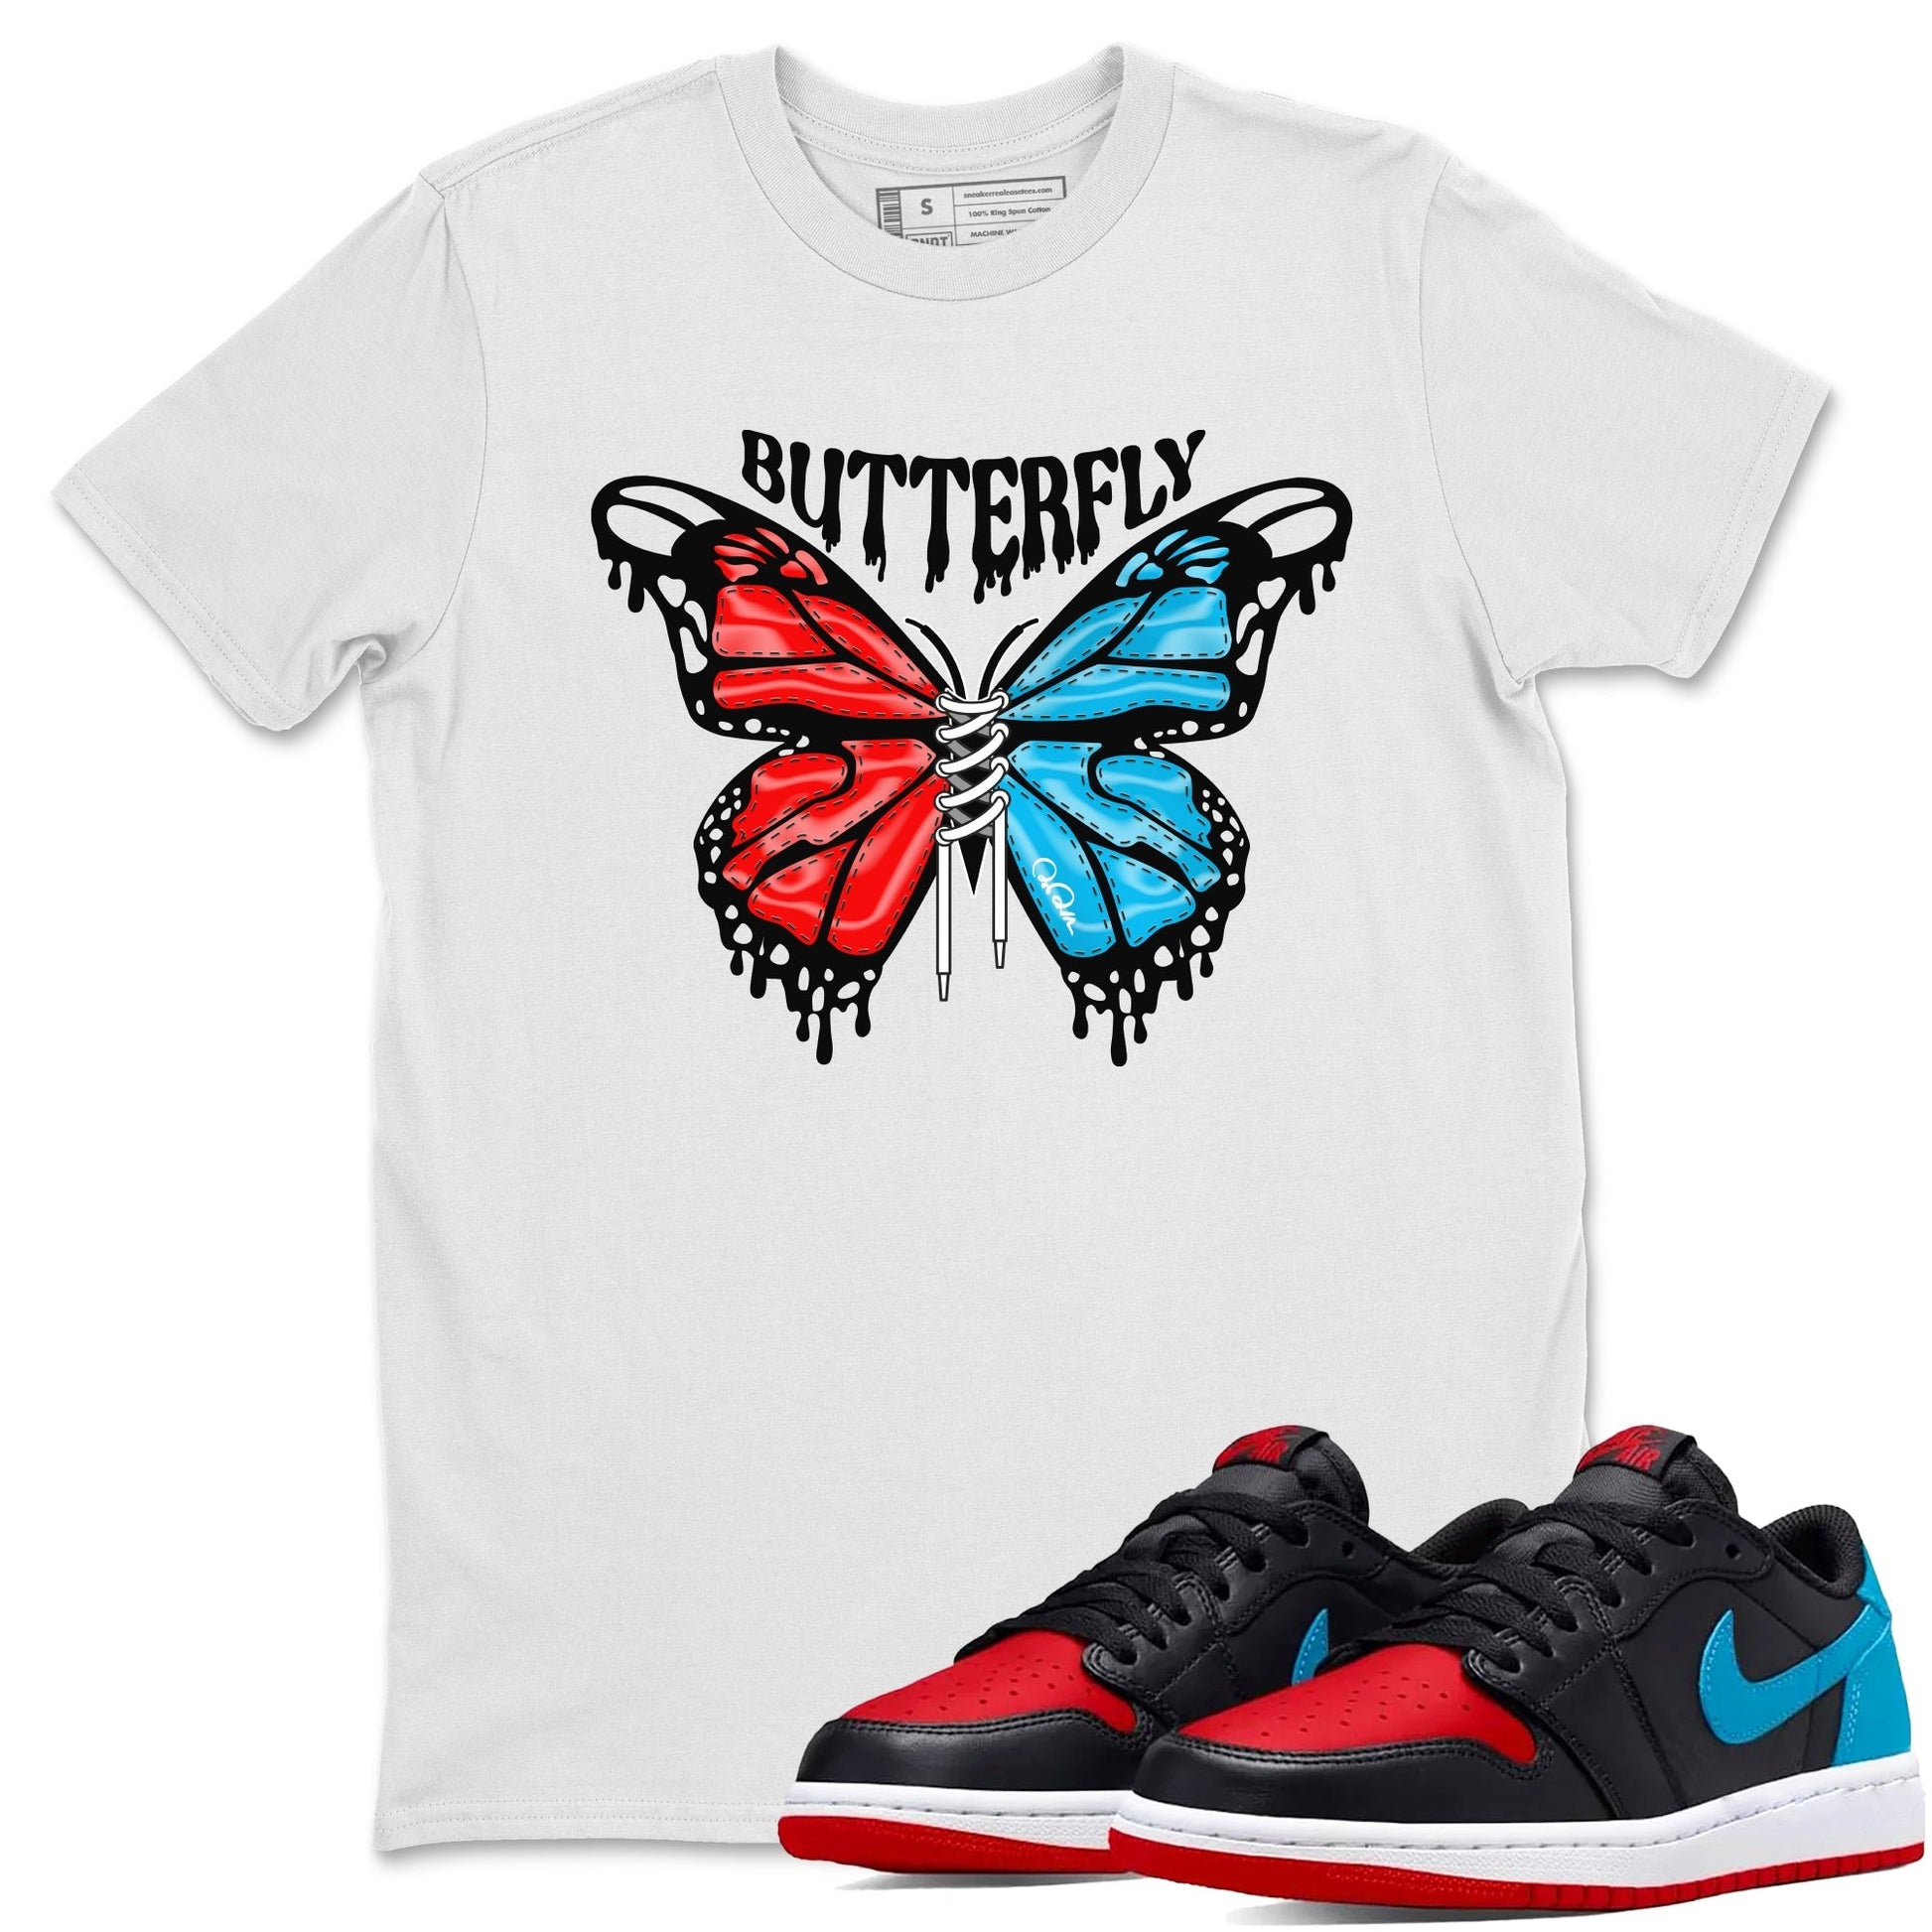 Air Jordan 1 UNC to Chicago Sneaker Match Tees Butterfly Streetwear Sneaker Shirt AJ1 UNC to Chicago Sneaker Release Tees Unisex Shirts White 1